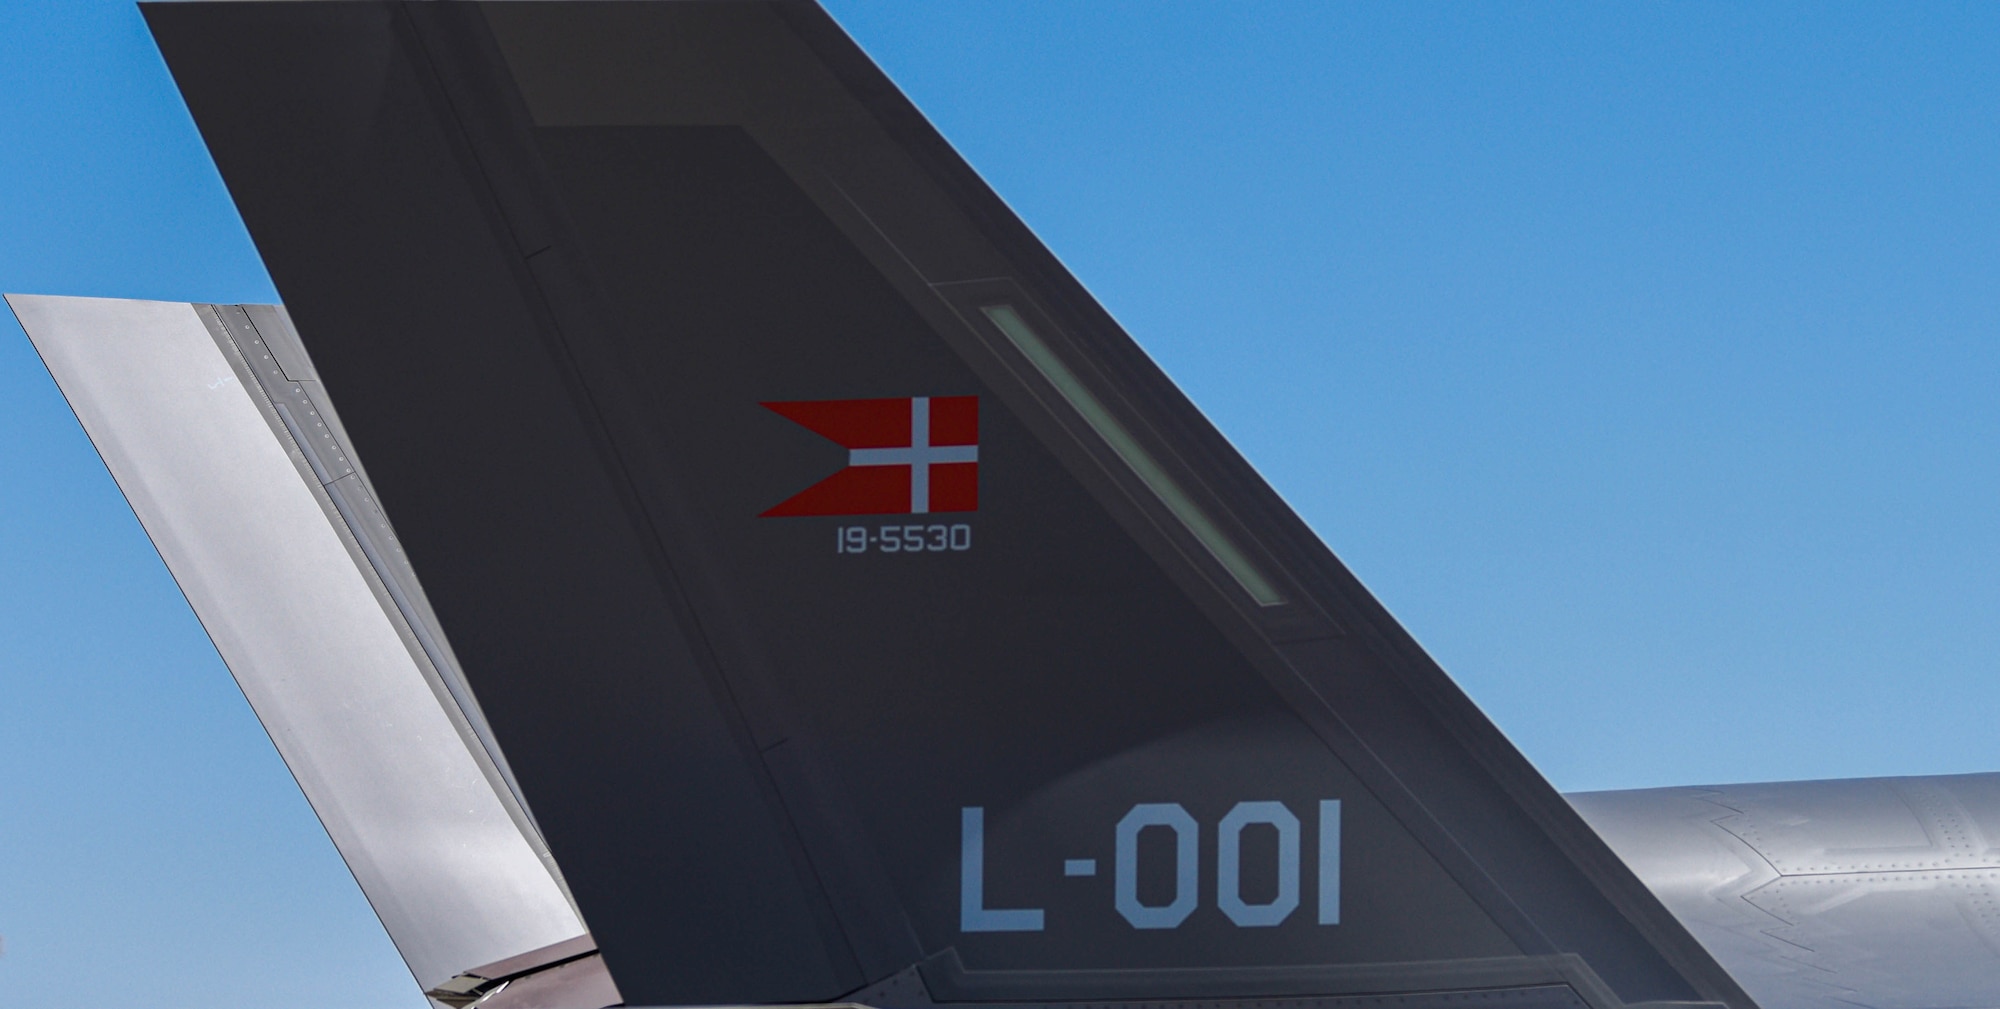 The Danish flag is represented on the tail of a Royal Danish Air Force F-35A Lightning II as the aircraft, assigned to the 308th Fighter Squadron, taxis on a runway April 13, 2021, at Luke Air Force Base, Arizona.